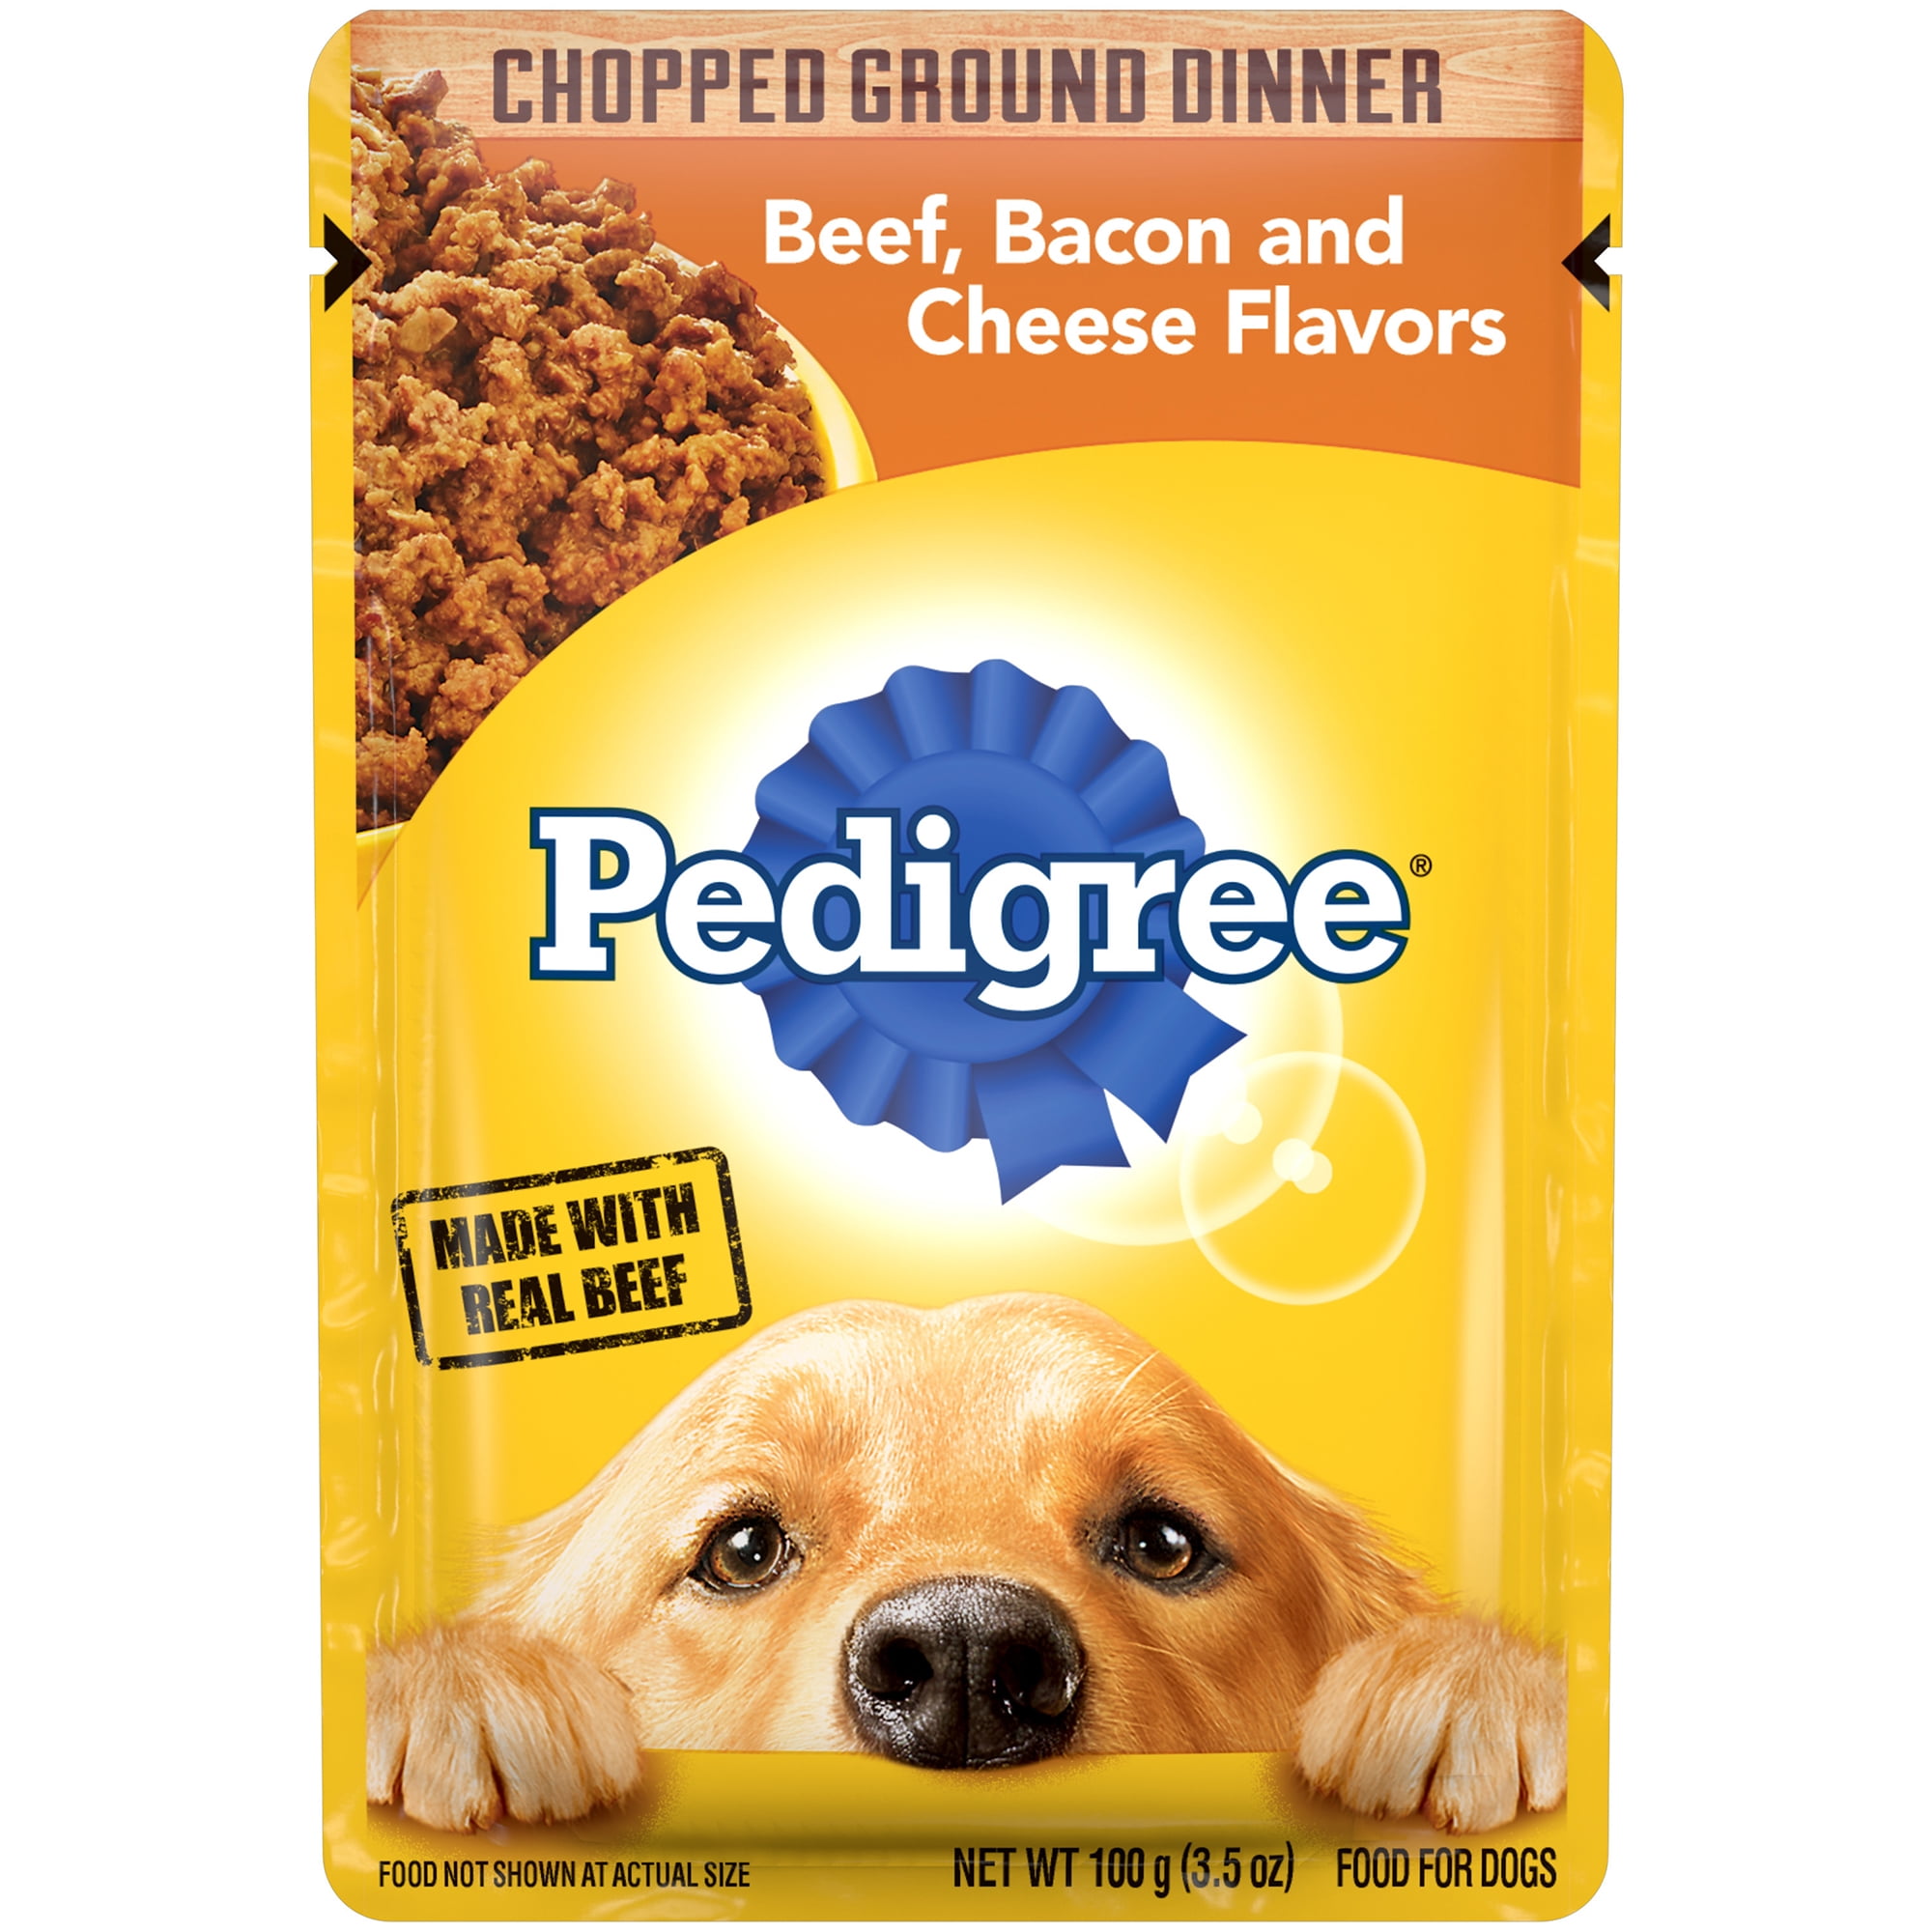 Pedigree Chopped Ground Dinner Beef, Cheese & Bacon Flavor Wet Food for Adult Dog, 3.5 oz. Pouch